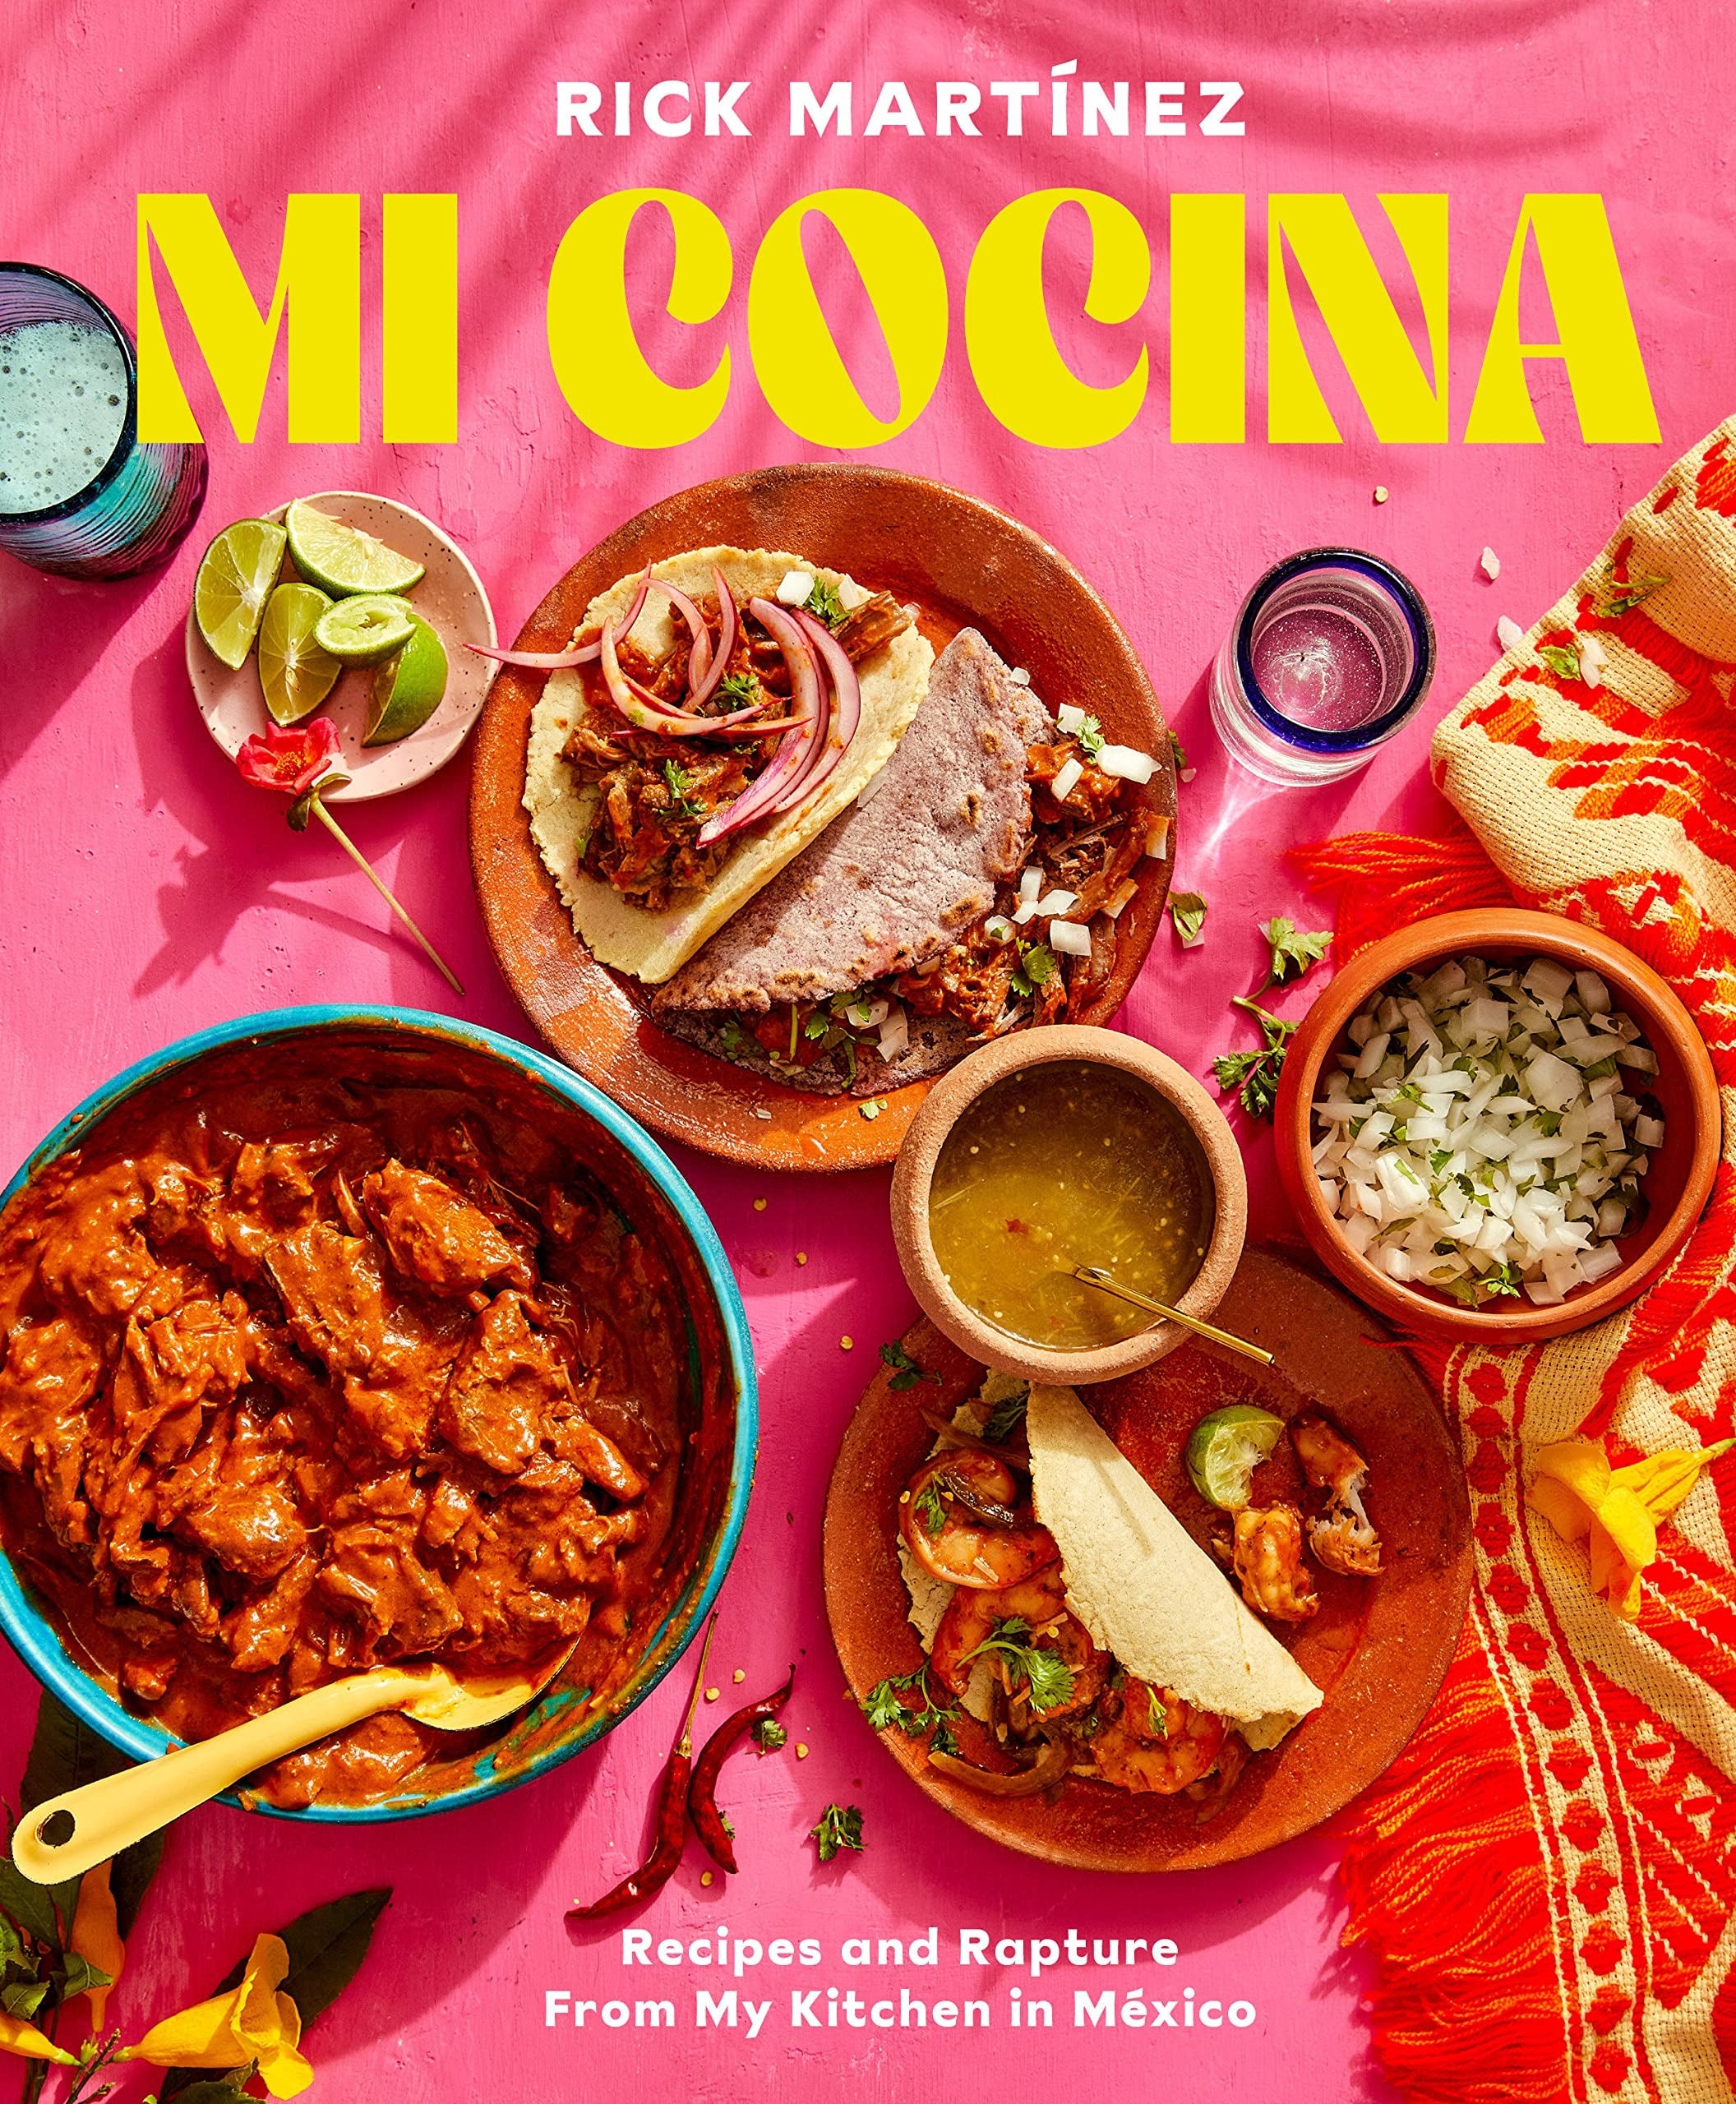 the pink Mi Cocina cookbook cover featuring plates of tacos and other Mexican dishes